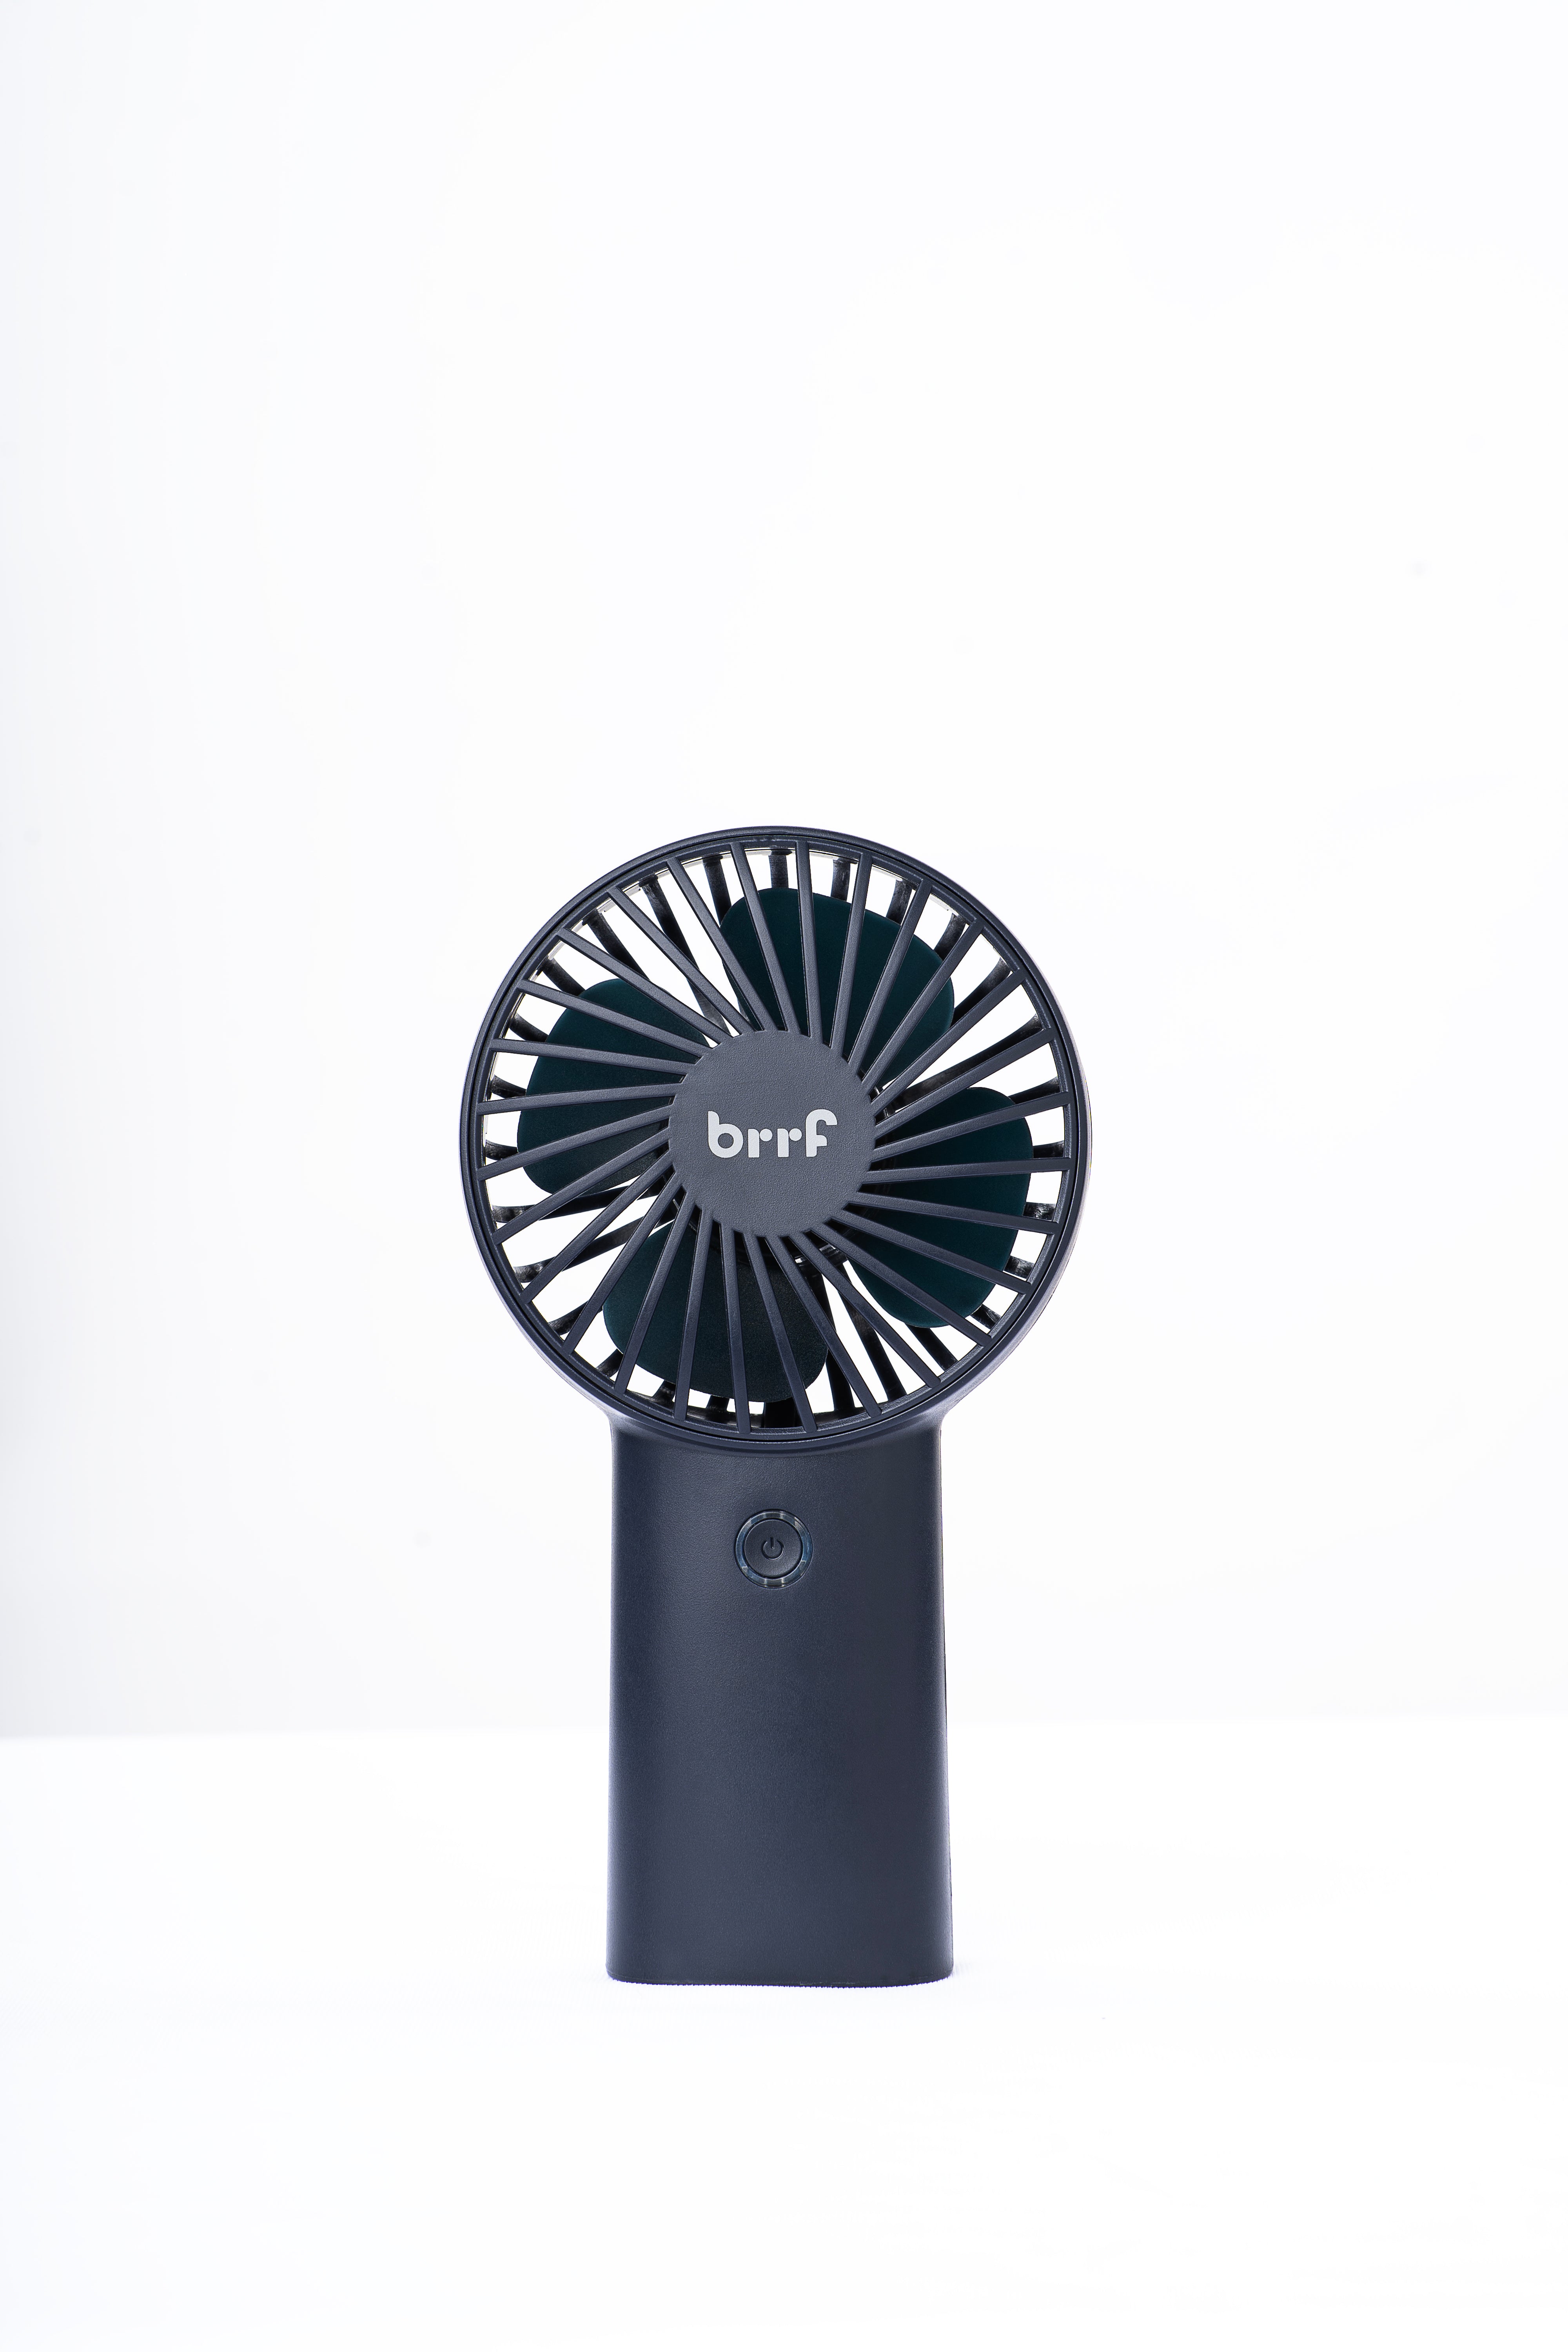 brrf Mini Thunder Handheld Fan (upto 18 hours running) USB Rechargeable 4000 mAh battery operated Portable Fan, Desk Fan, Carry it anywhere